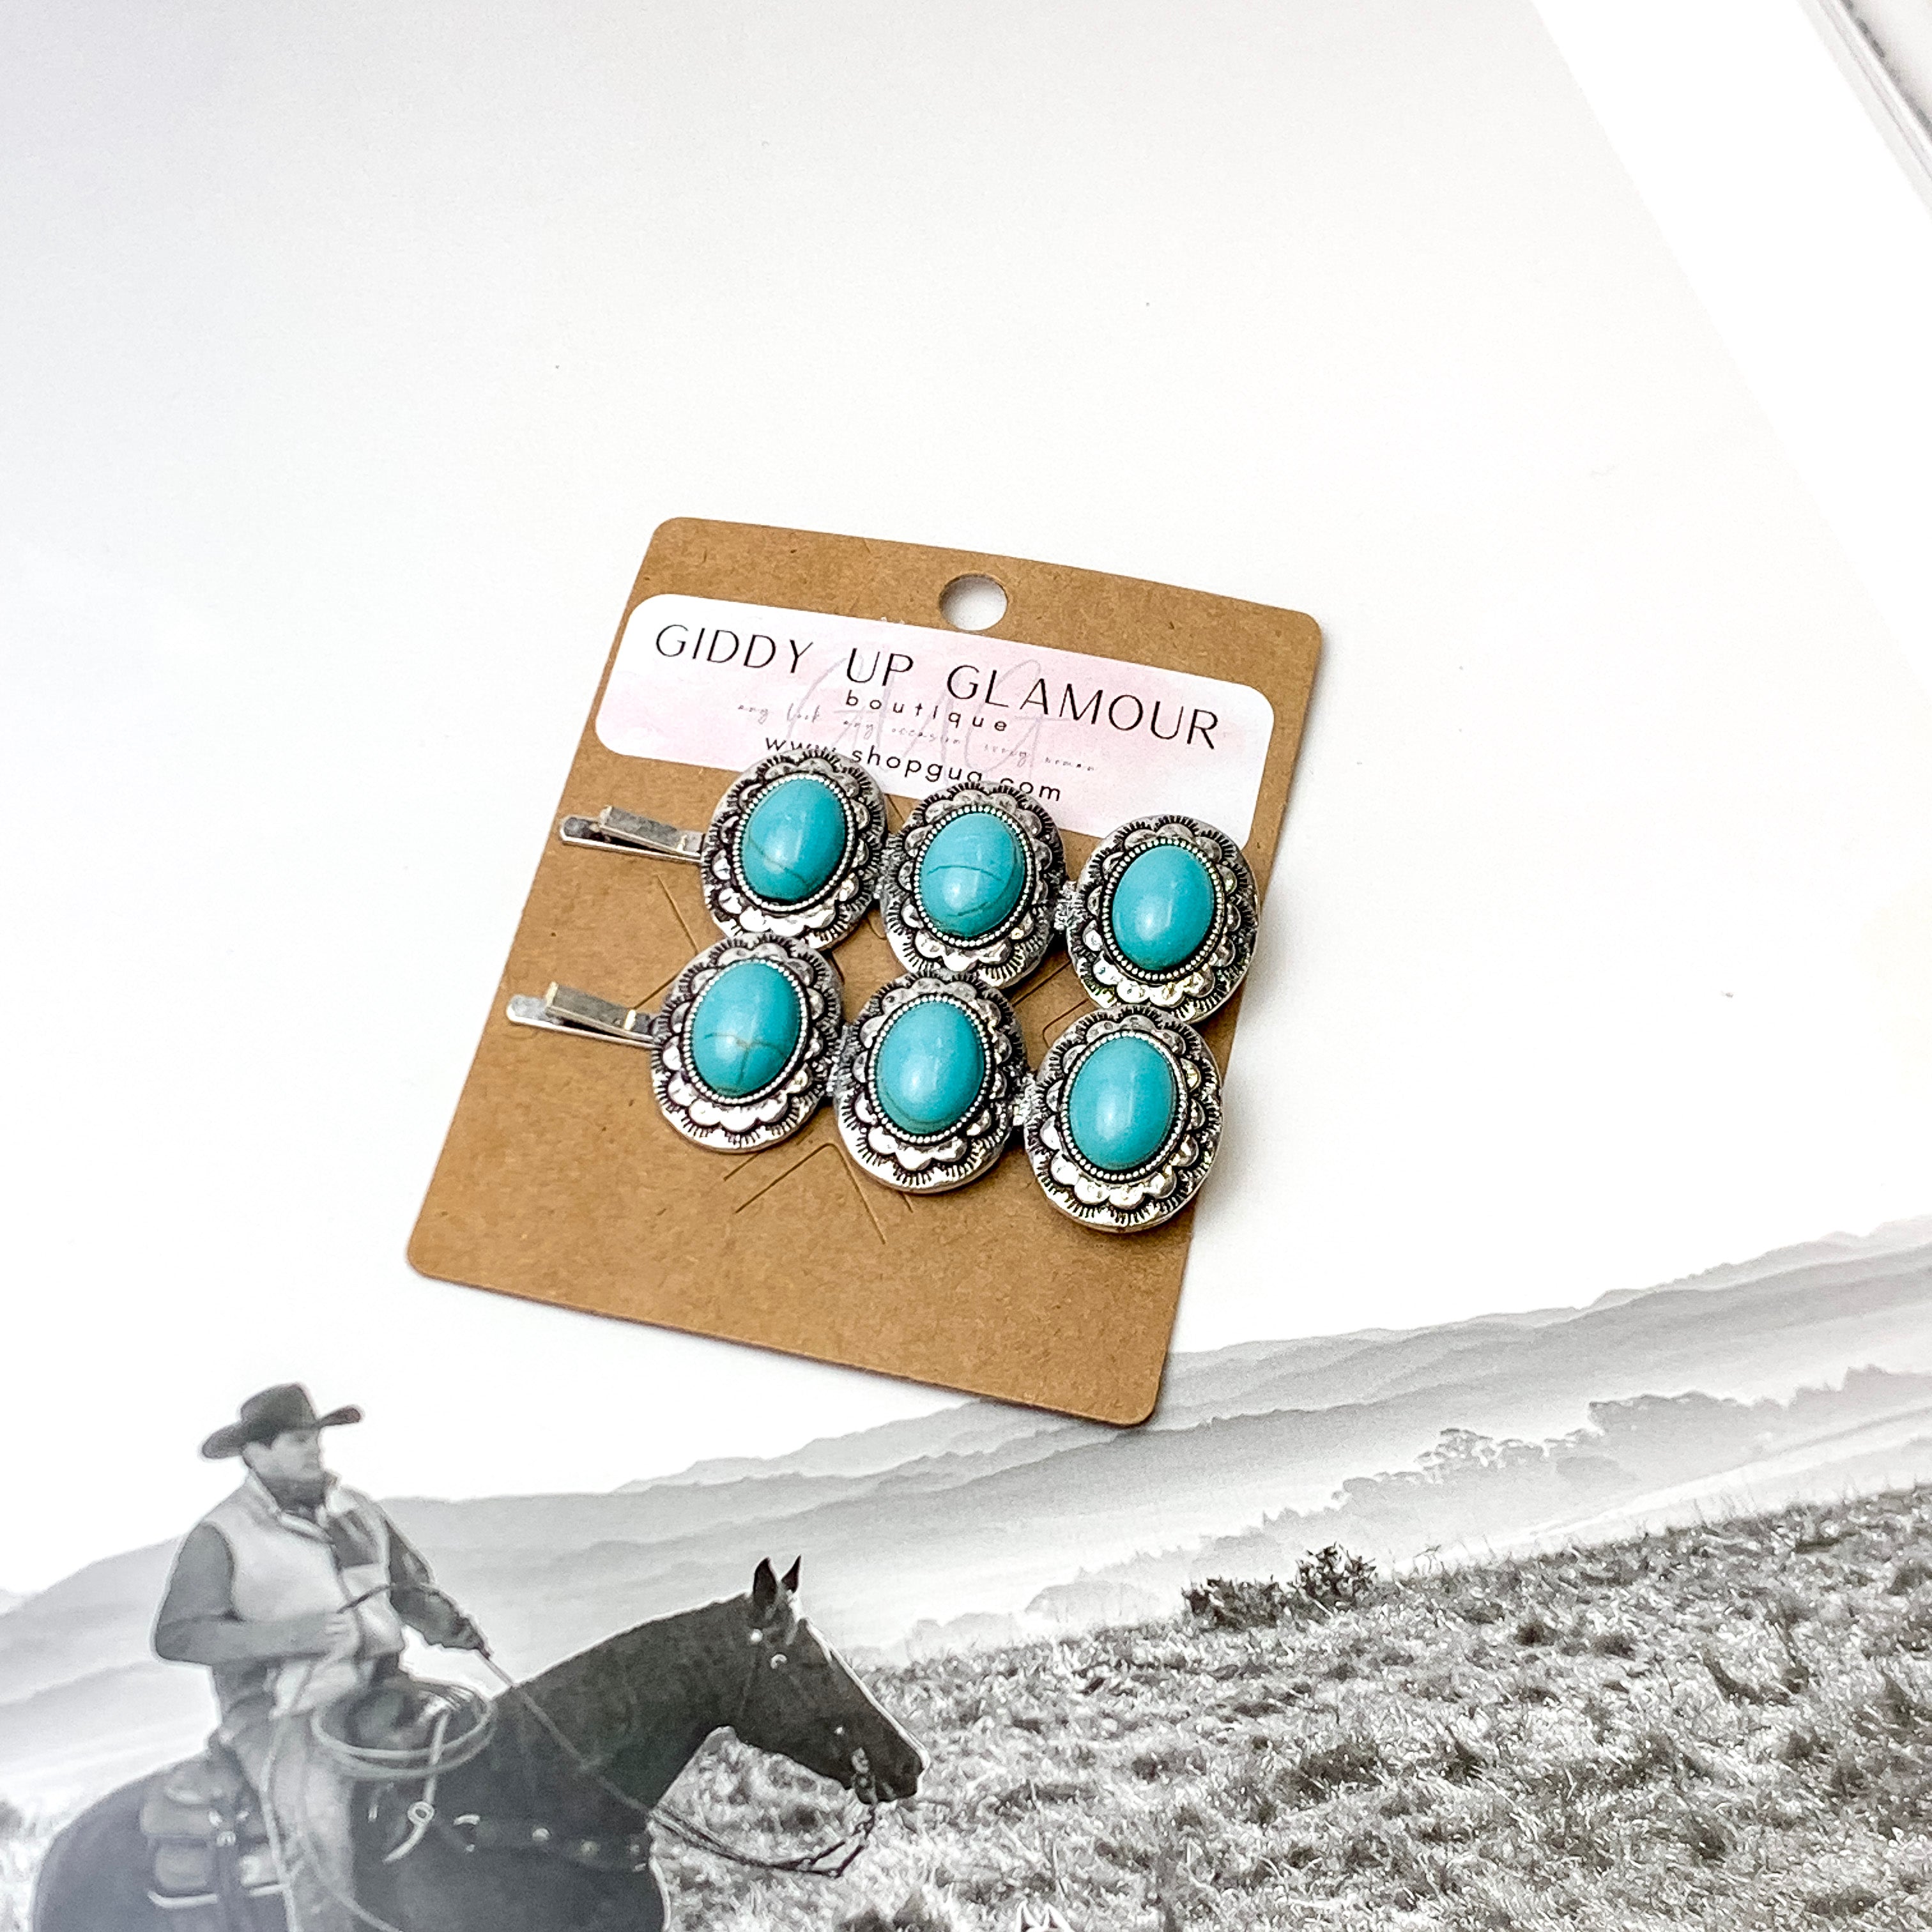 Set of Two | Faux Turquoise Concho Bobby Pins - Giddy Up Glamour Boutique